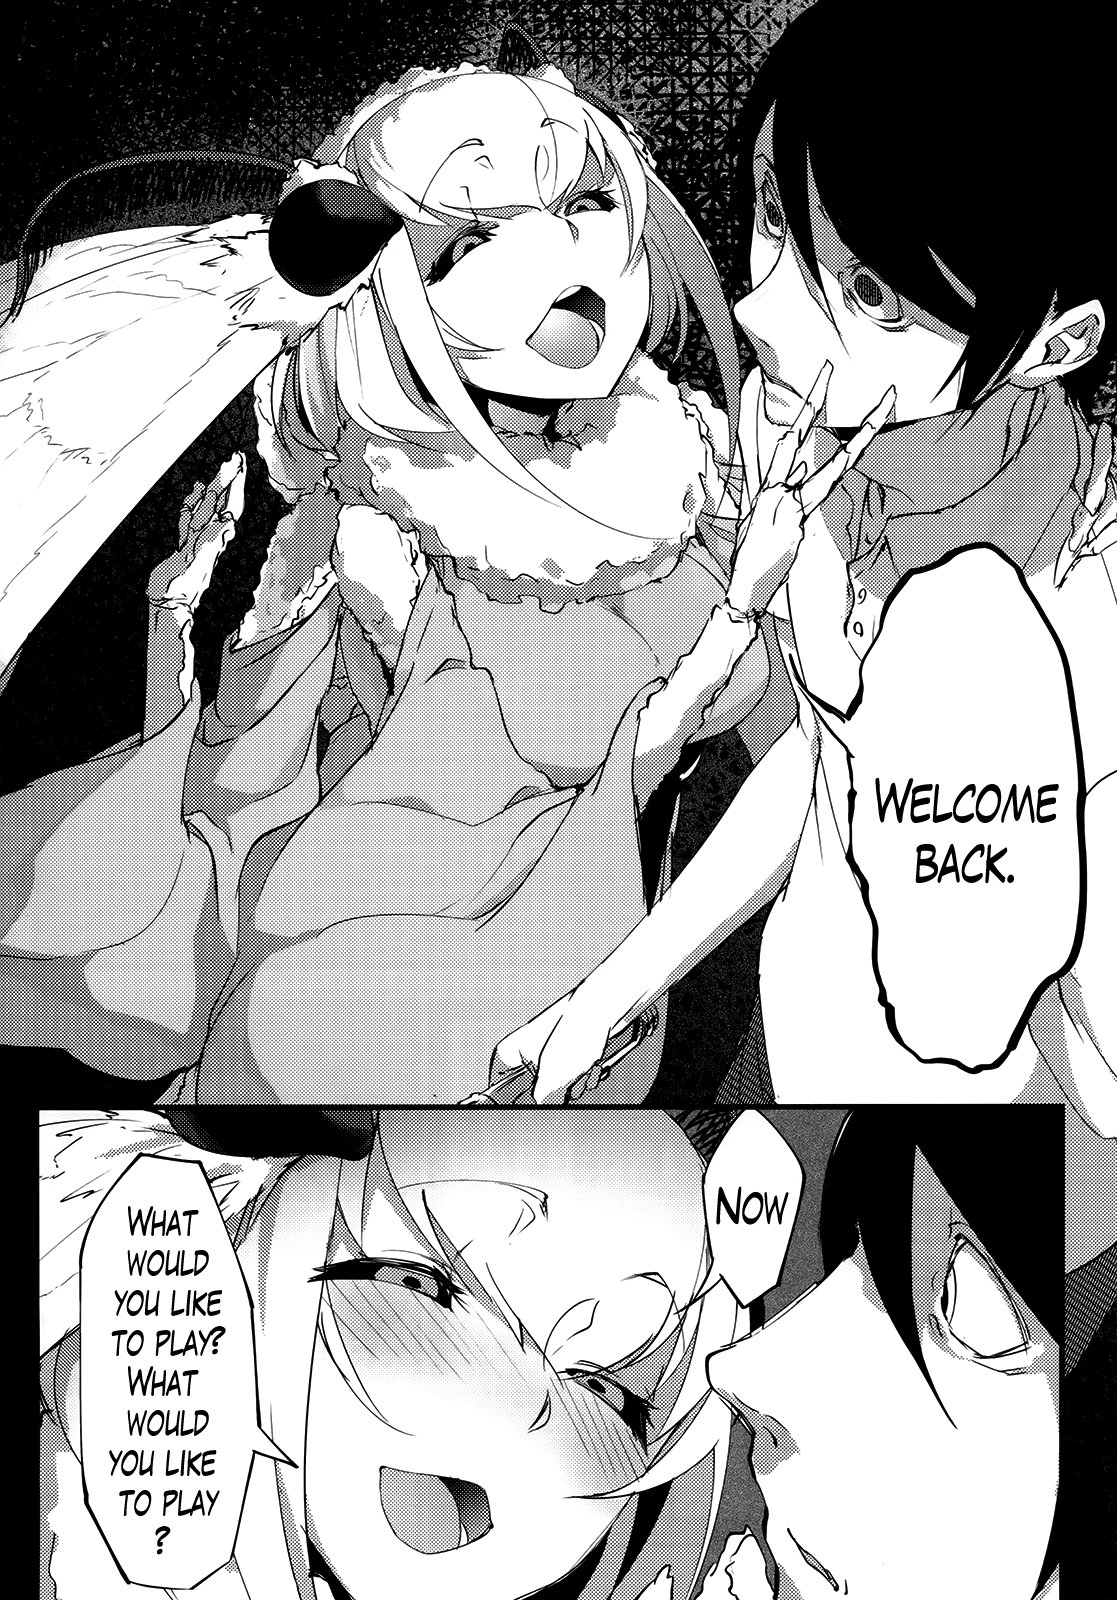 mo.e on X: The moth girl doujin is pretty good even though I'm not a fan  of monster girls. t.coBT9A0QH87W  X